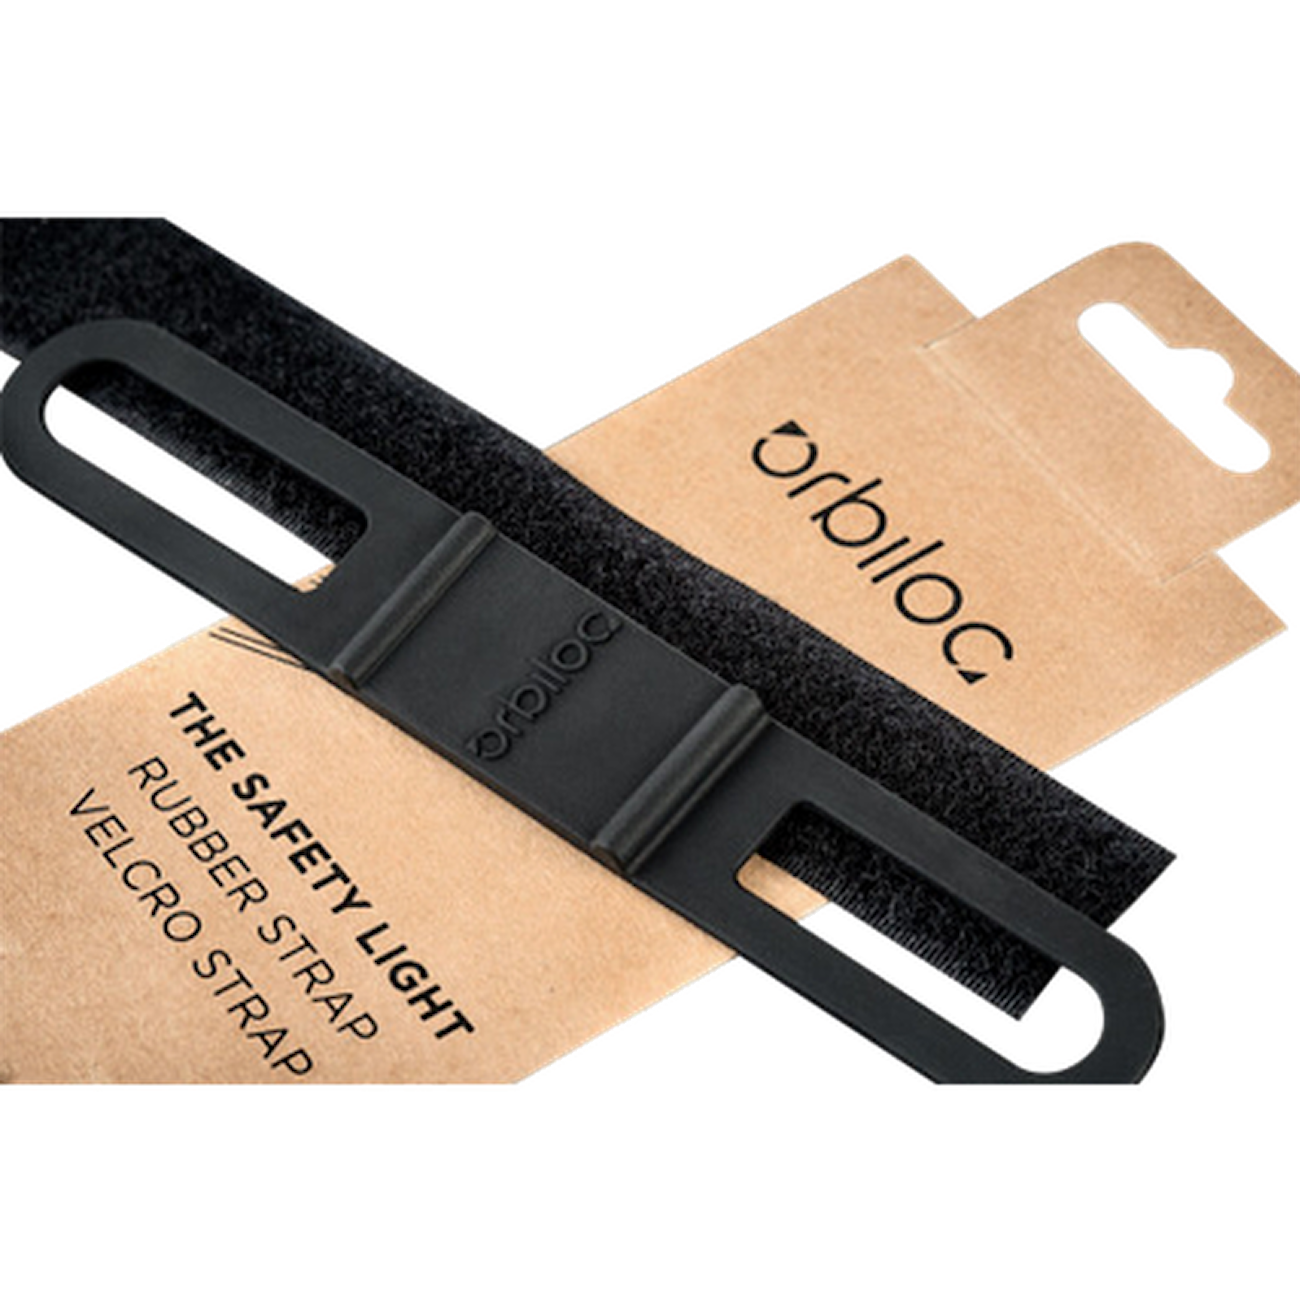 Dual Accessories Straps Kit Rubber Strap and Velcro Strap - Attachment For Safety Light LED Black 1 st